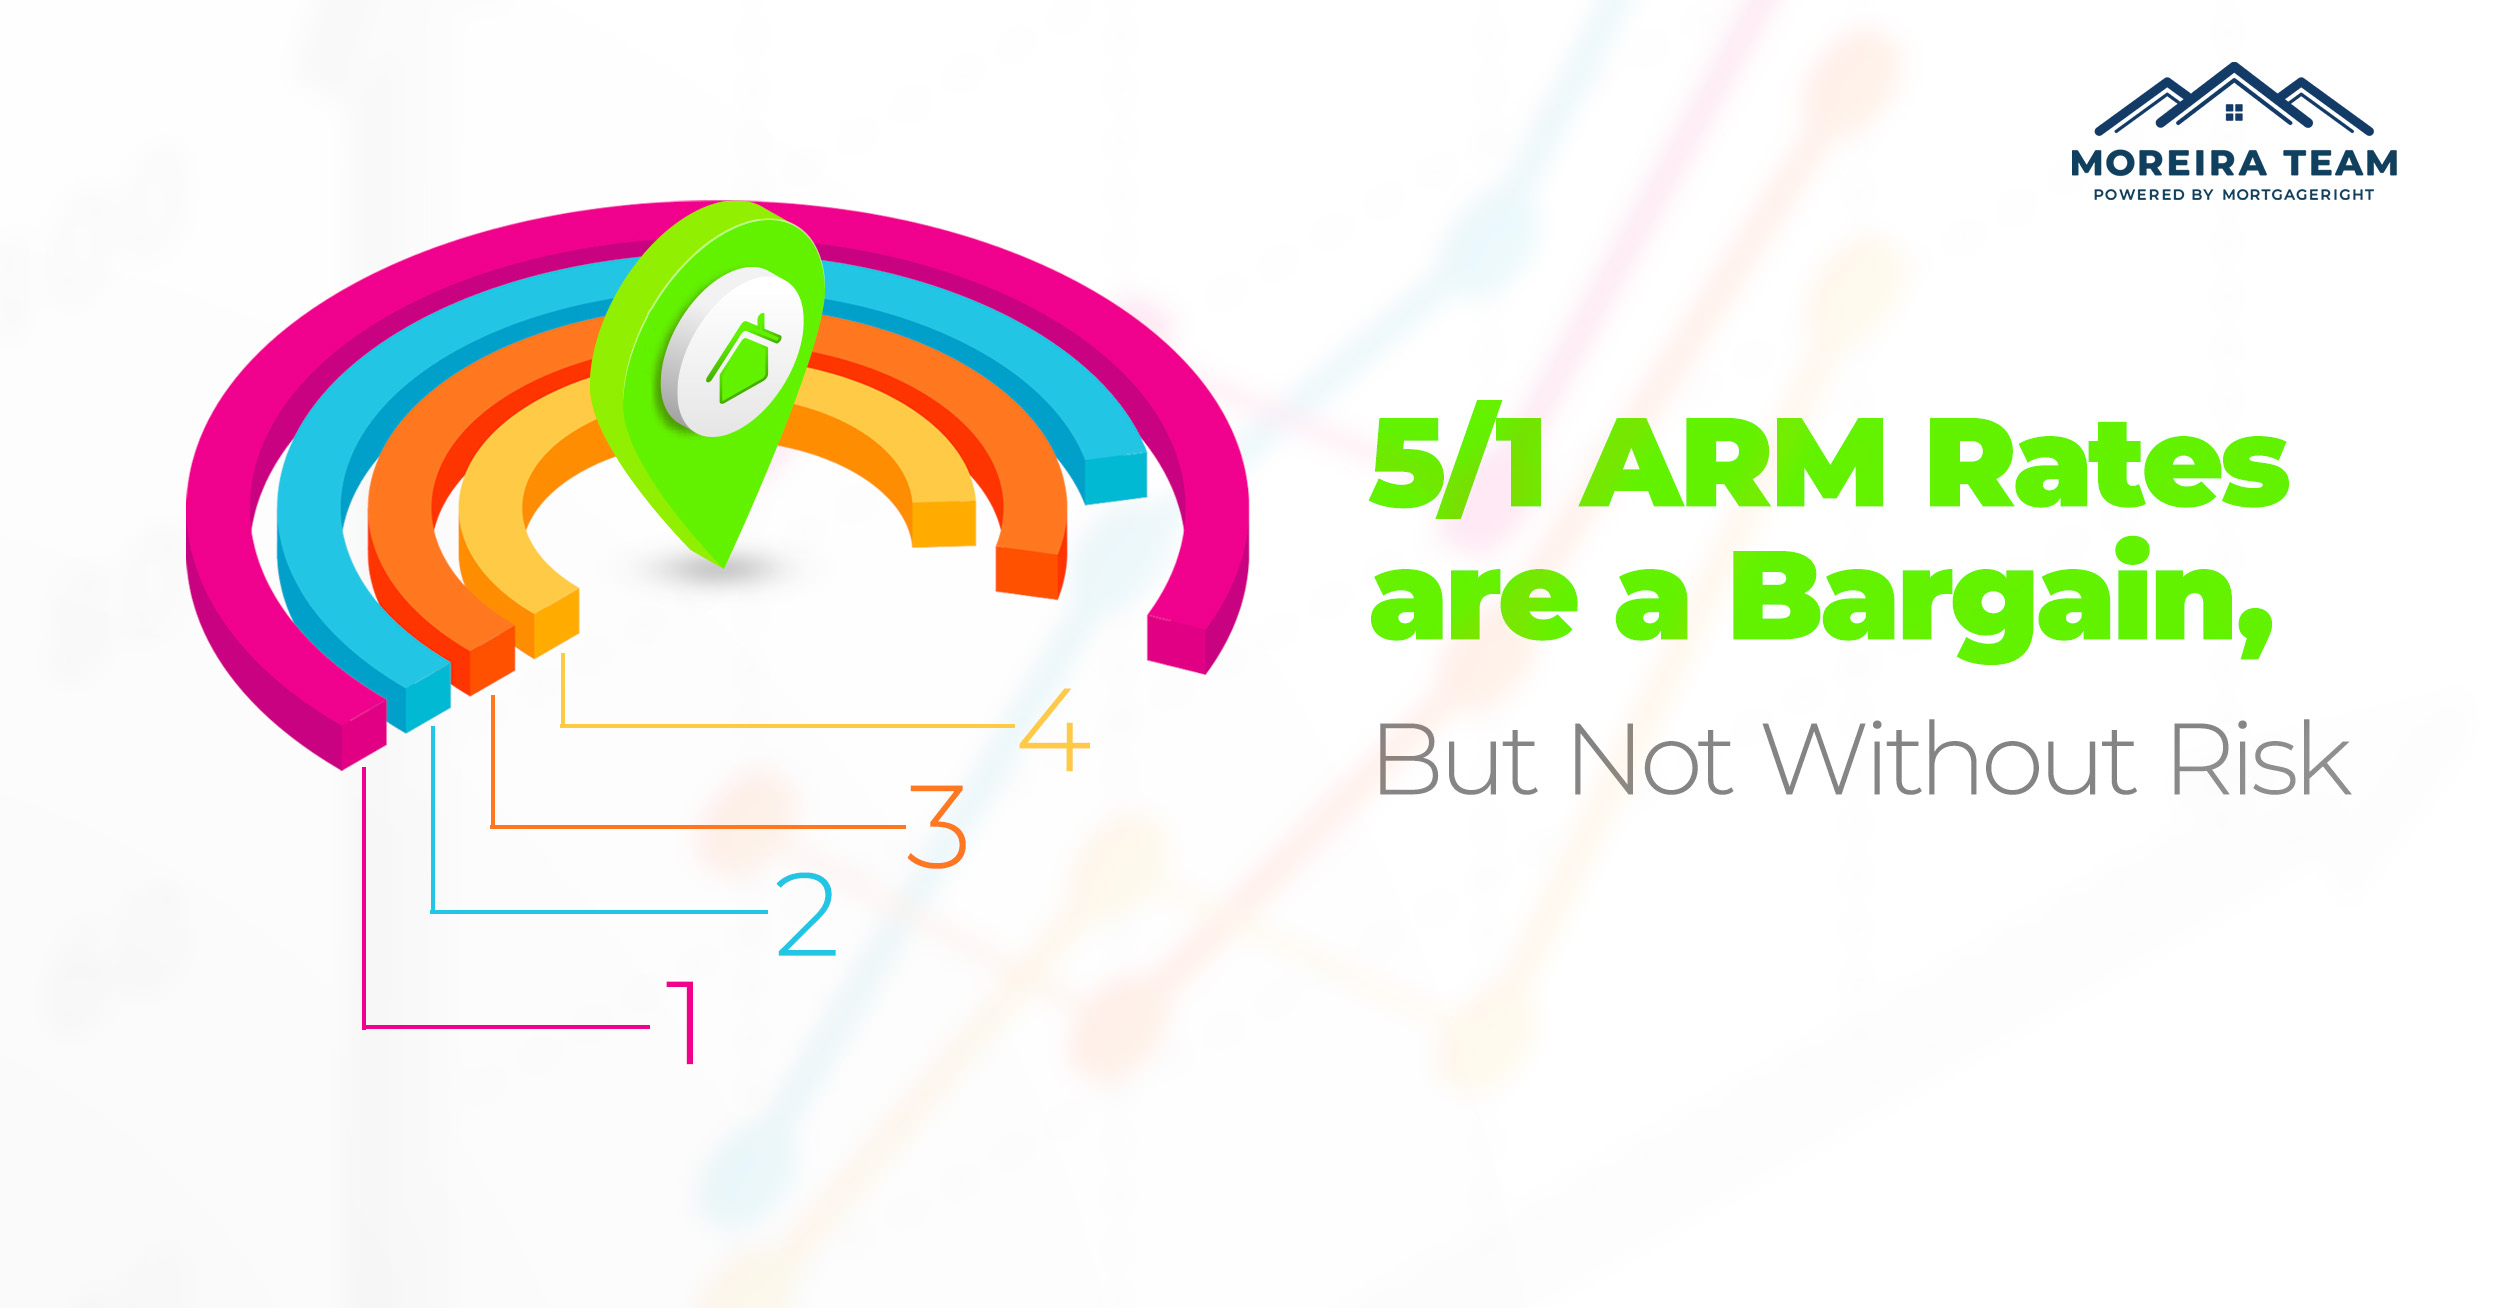 5/1 ARM Rates are a Bargain, But Not Without Risk